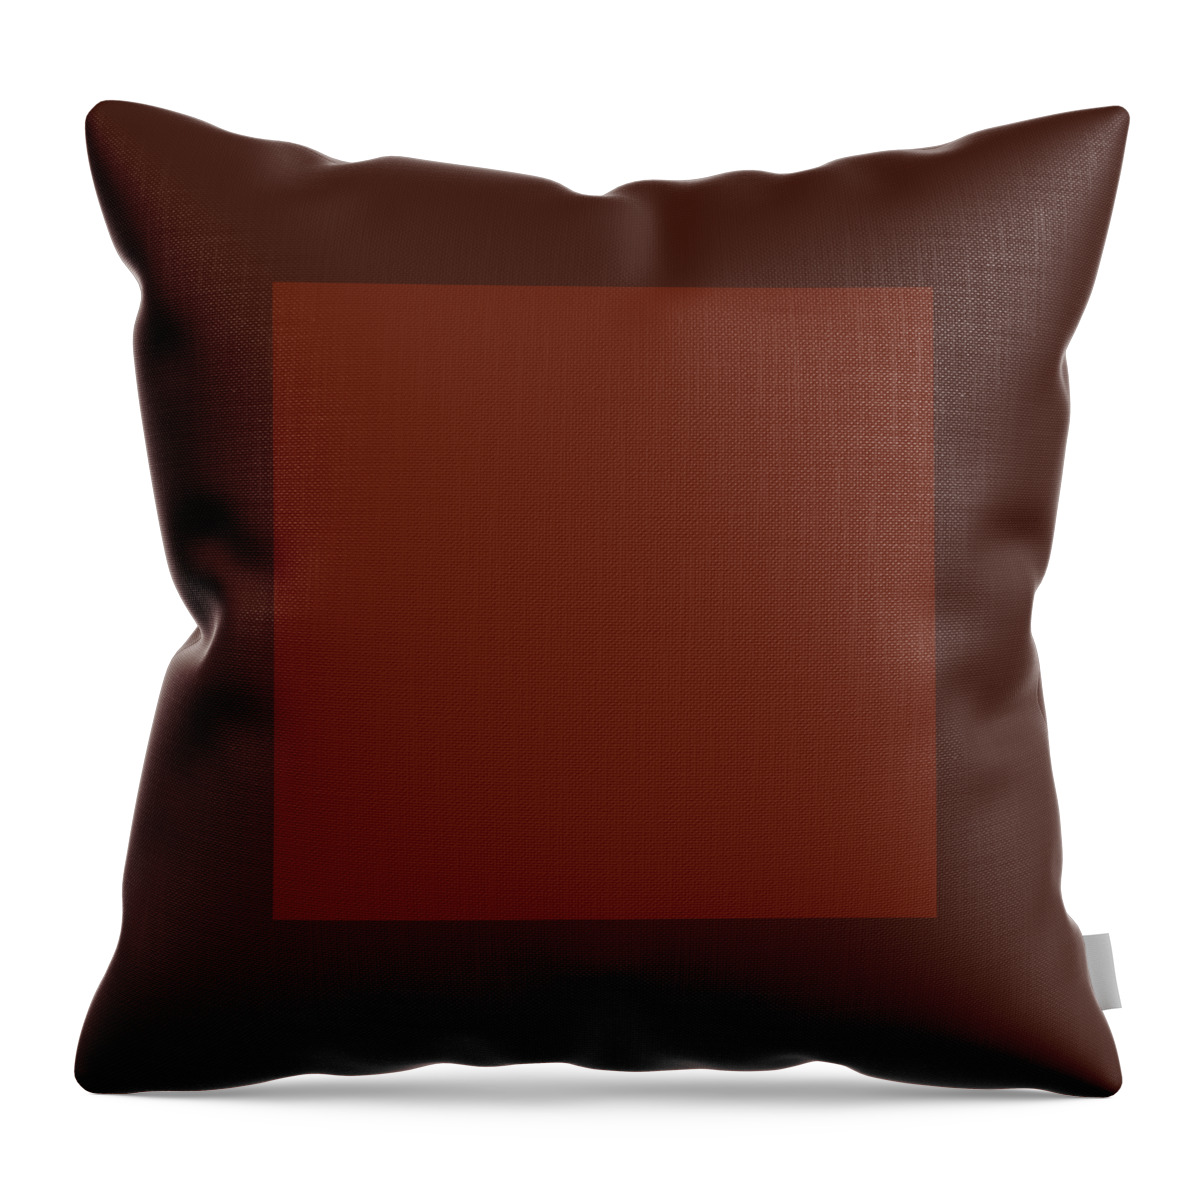 Deep Throw Pillow featuring the digital art Deep Reddish Brown Solid Plain Color for Home Decor Pillows Blankets by Delynn Addams